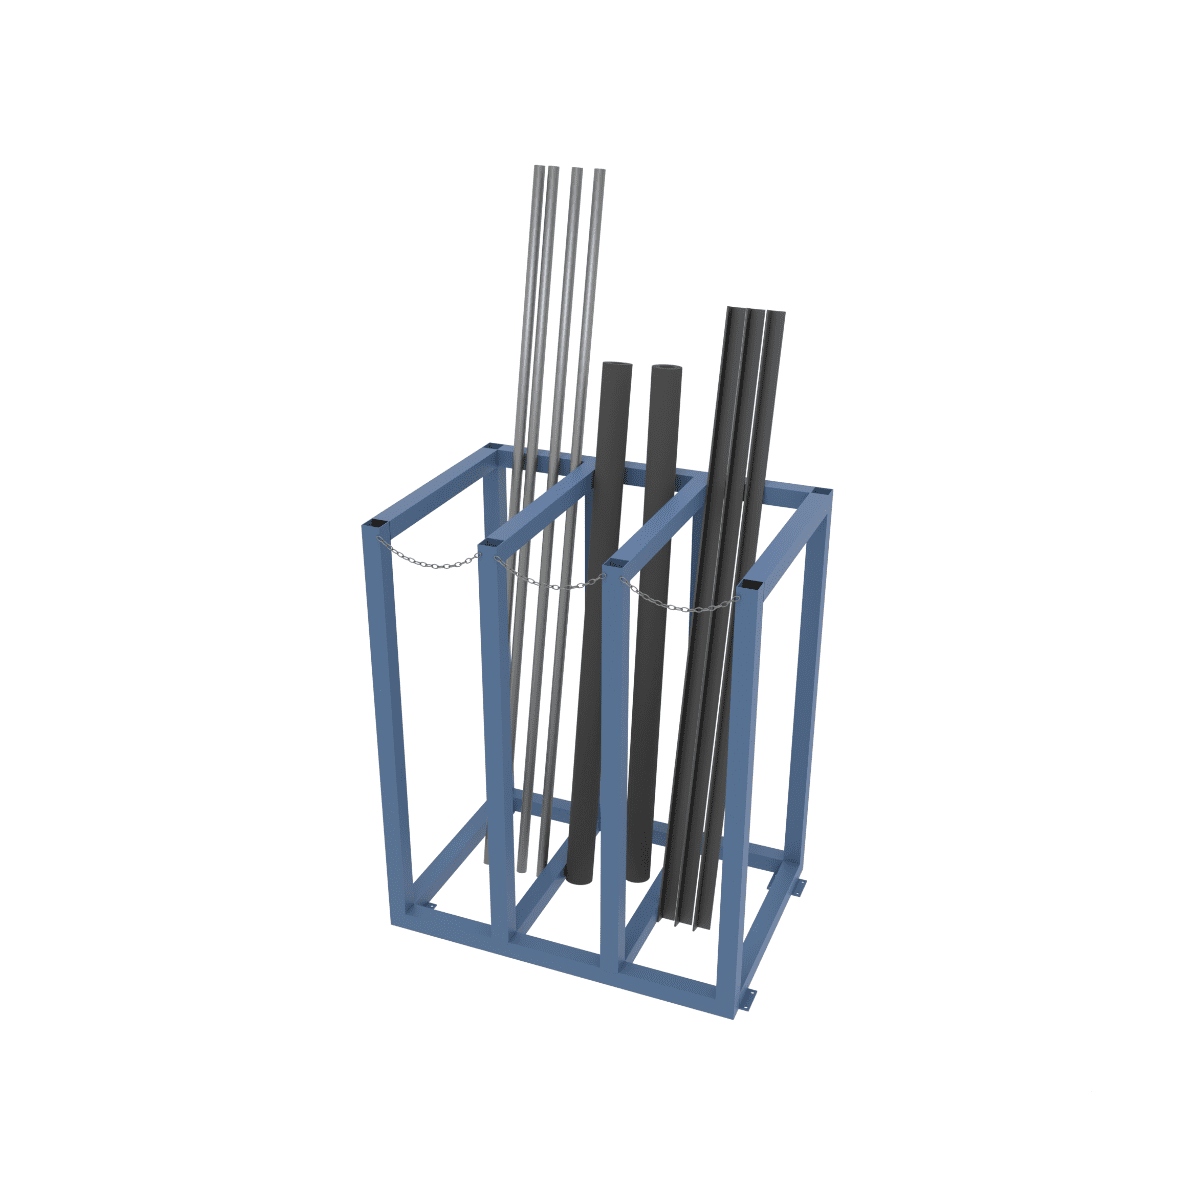 Larger Heavy Duty Vertical Storage Racking featuring pipes, rods & longer length products 